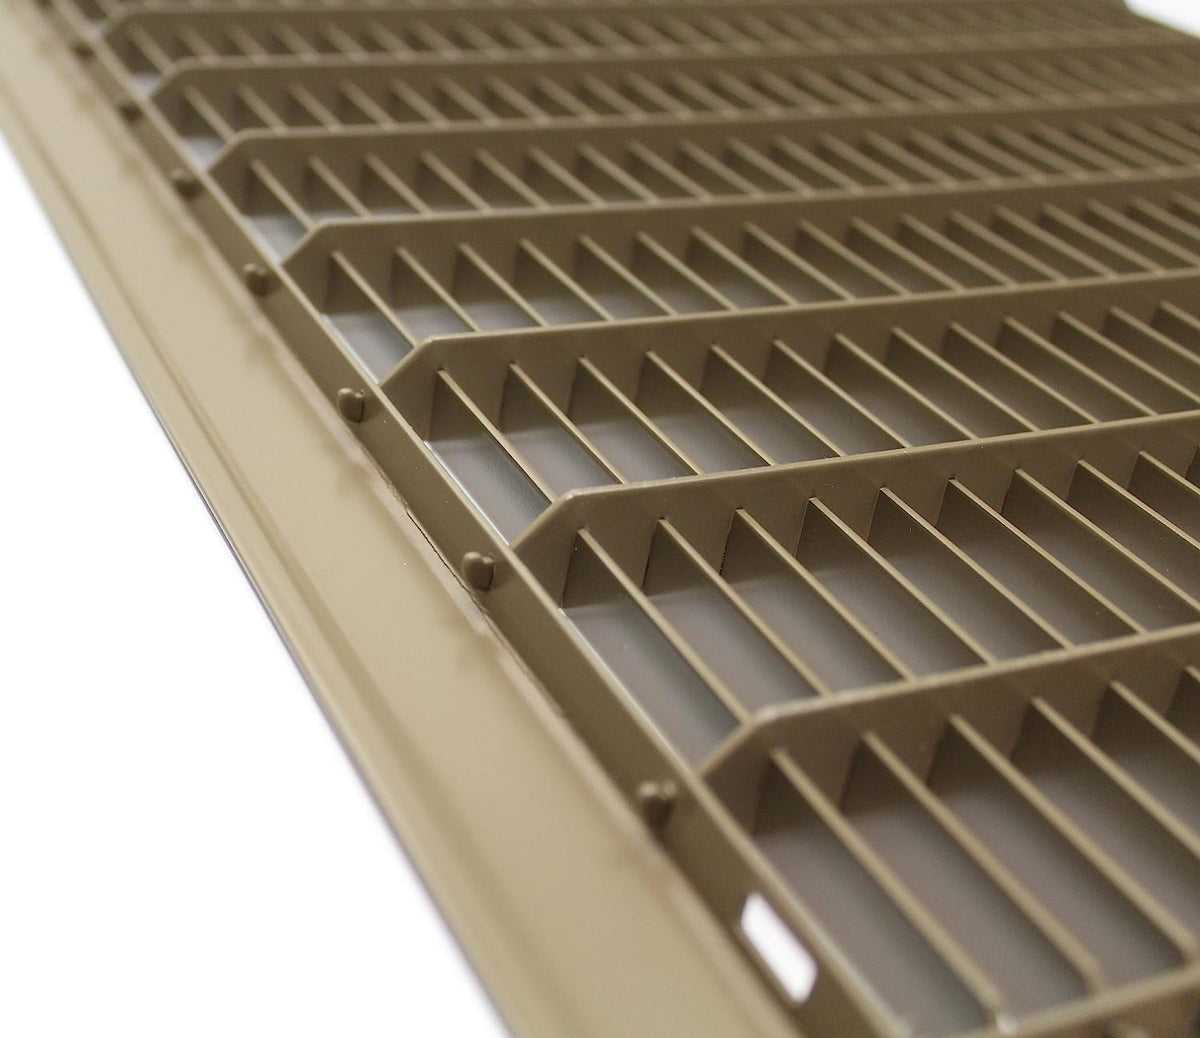 8&quot; X 8&quot; Heavy Duty Floor Grille - Fixed Blades Air Grille - Brown [Outer Dimensions: 9.75 X 9.75]